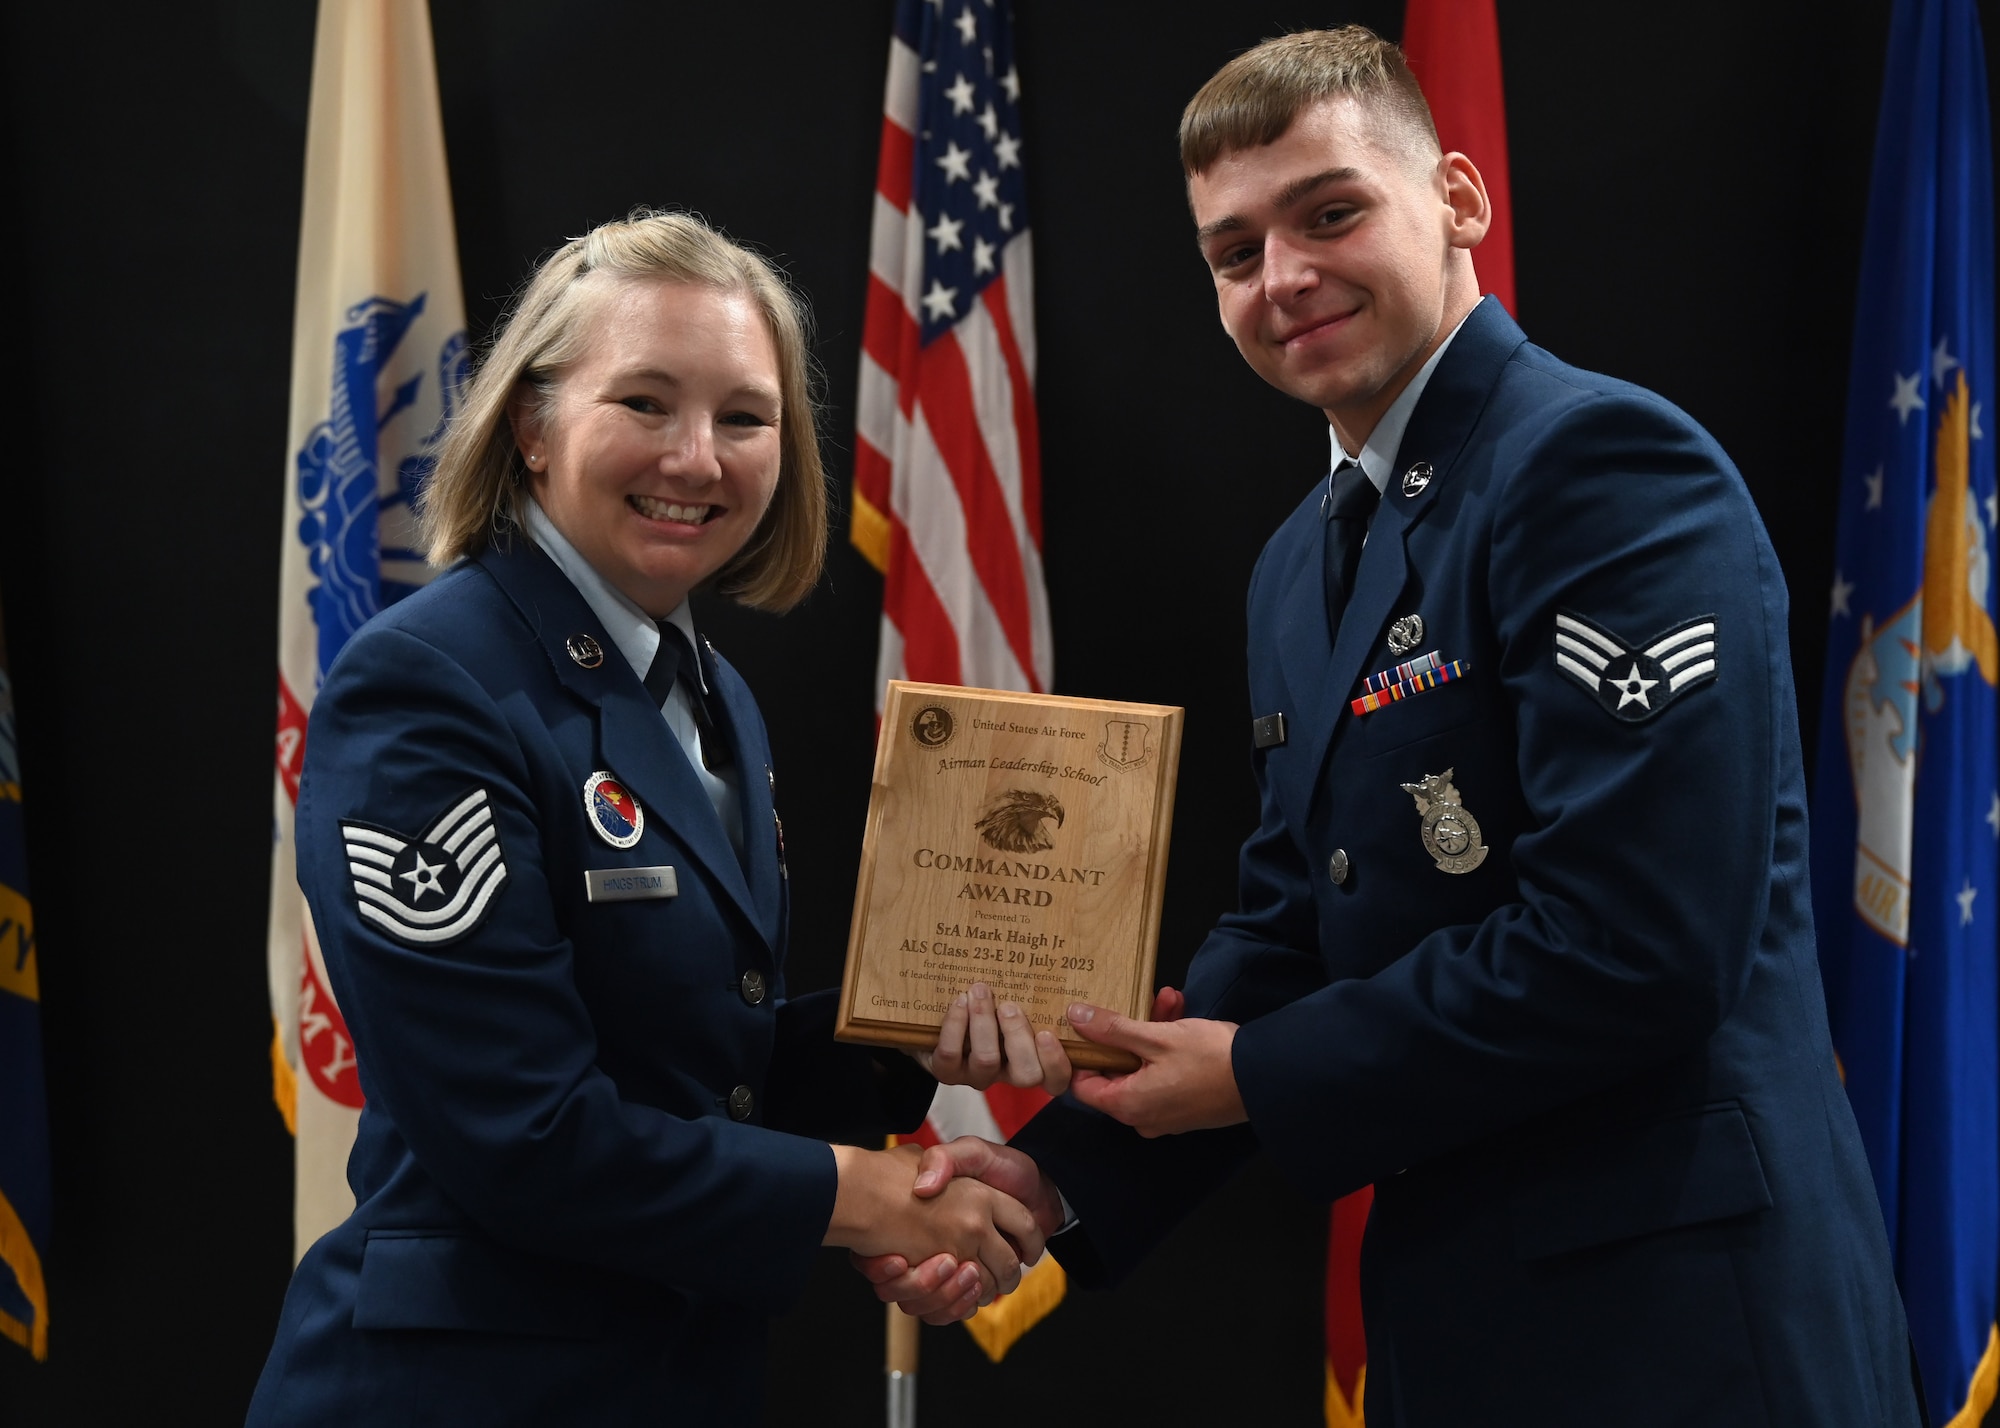 U.S. Air Force Tech. Sgt. Kristin Hingstrum, Airman Leadership School commandant, presents the Commandant Award to Senior Airman Mark Haigh Jr., Class 23-E Airman Leadership School graduate, at the Class 23-E ALS graduation in the Powell Event Center, Goodfellow Air Force Base, Texas, July 20, 2023. The Commandant Award is presented to the person who demonstrated superior leadership as identified by their peers and the ALS staff. (U.S. Air Force photo by Senior Airman Ethan Sherwood)